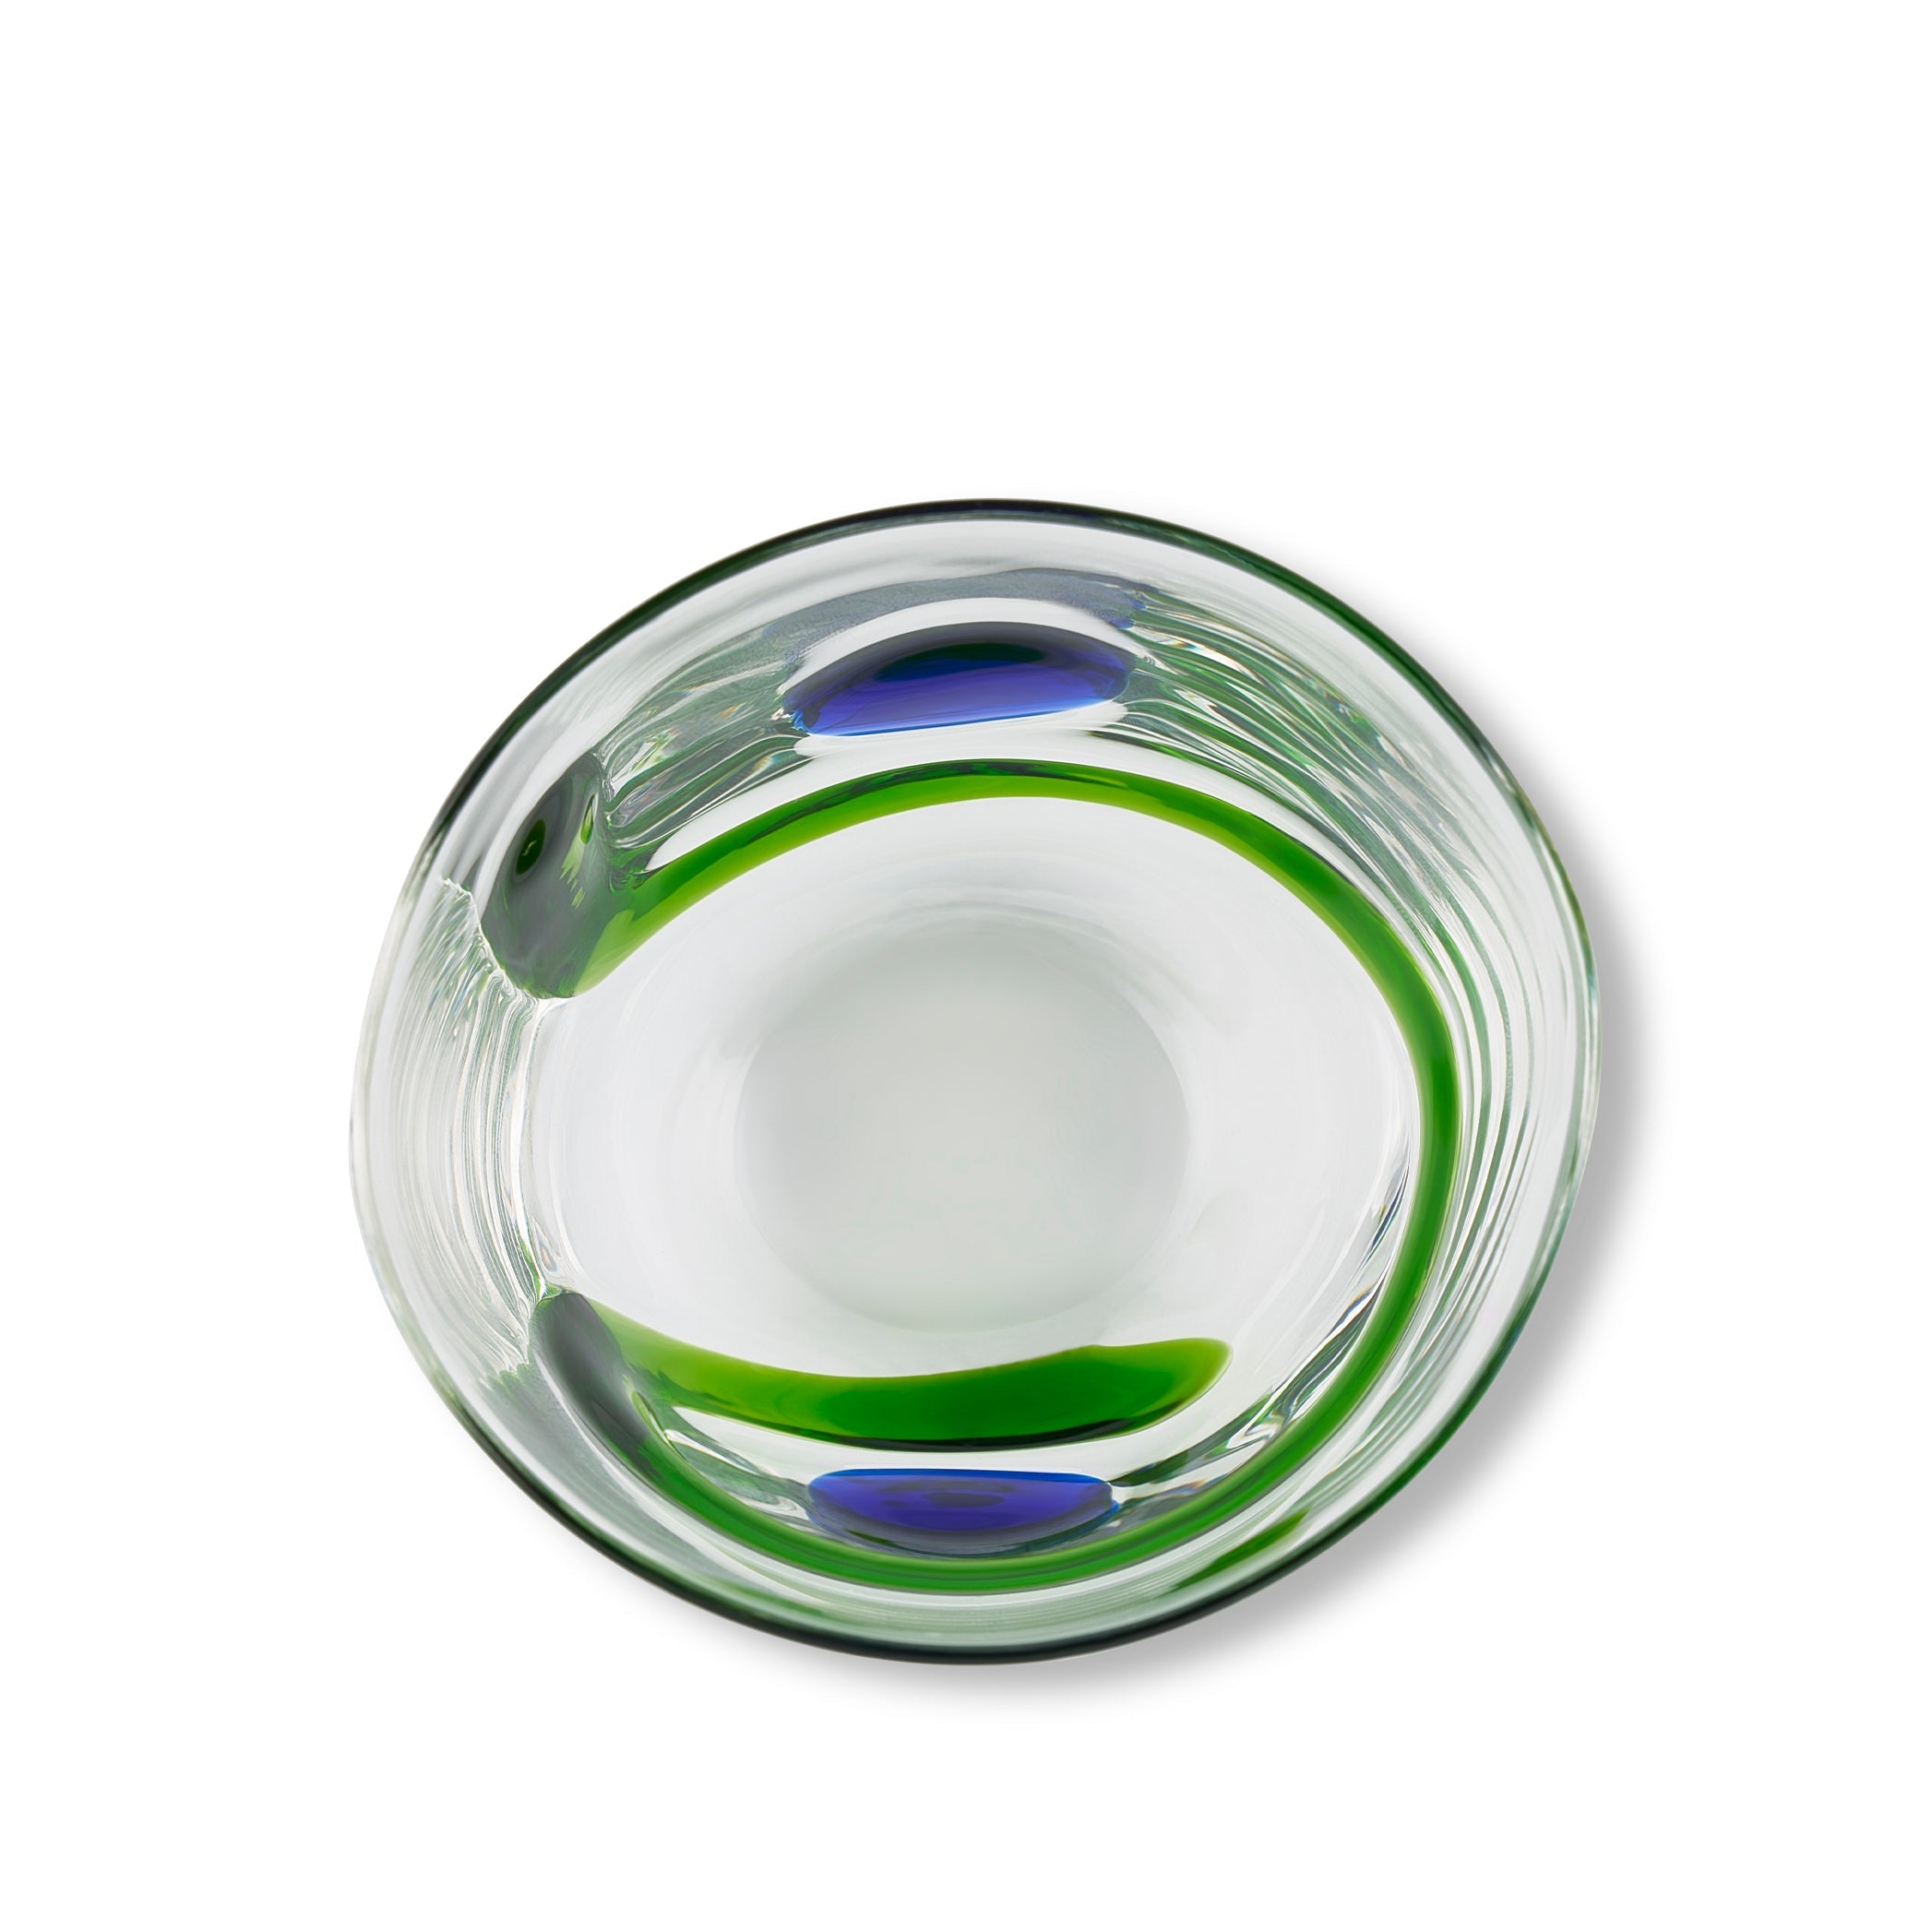 Set of Two Murano Spot & Swirl Handblown Glass Tumblers in Green and Blue, 8.5cm